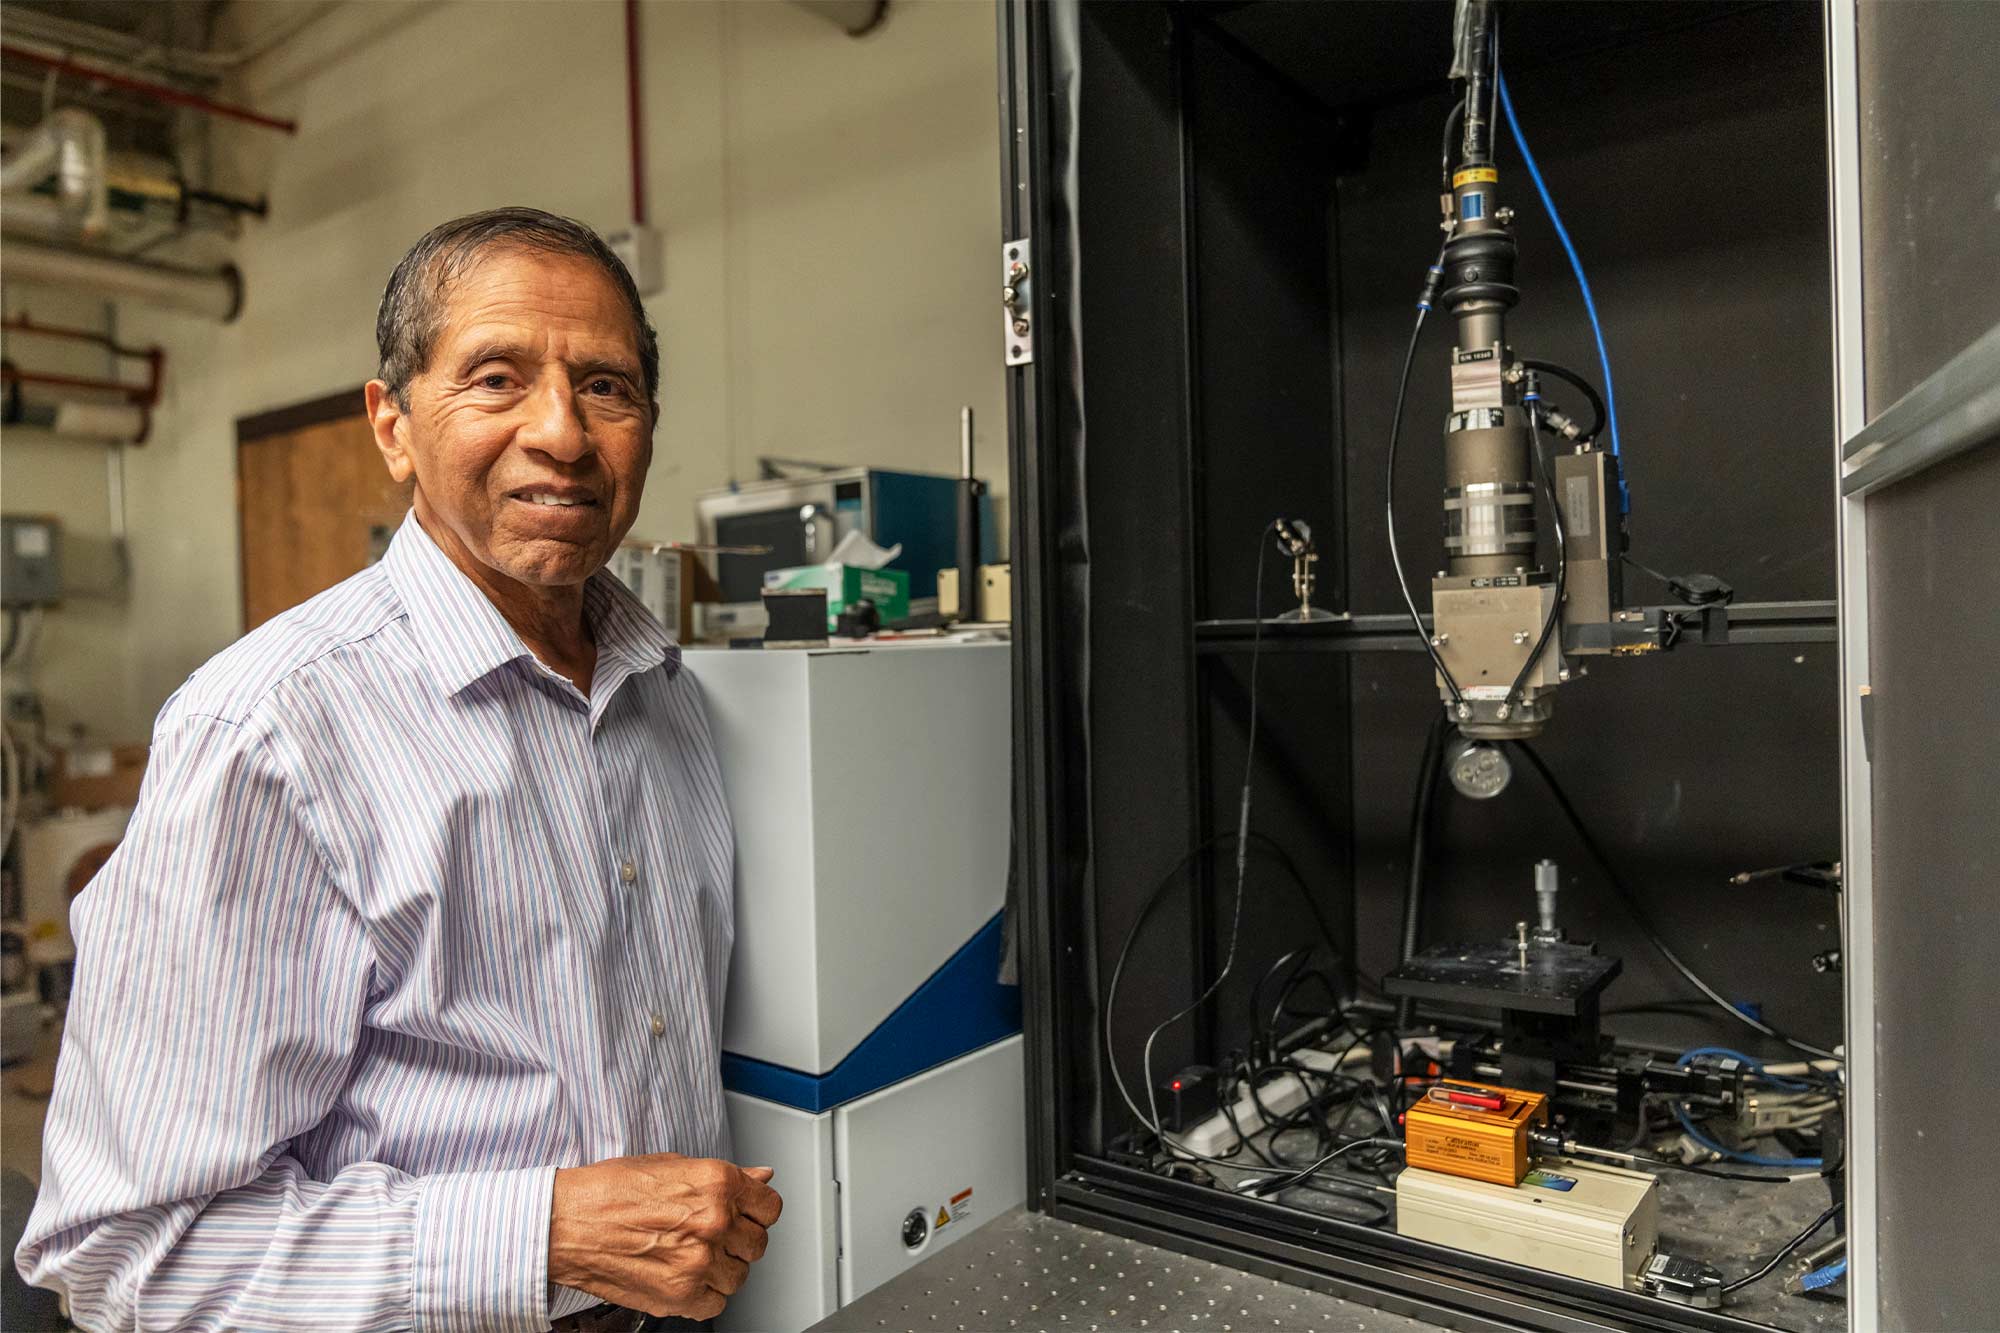 Mool Gupta stands next to a piece of machinery and looks at the camera